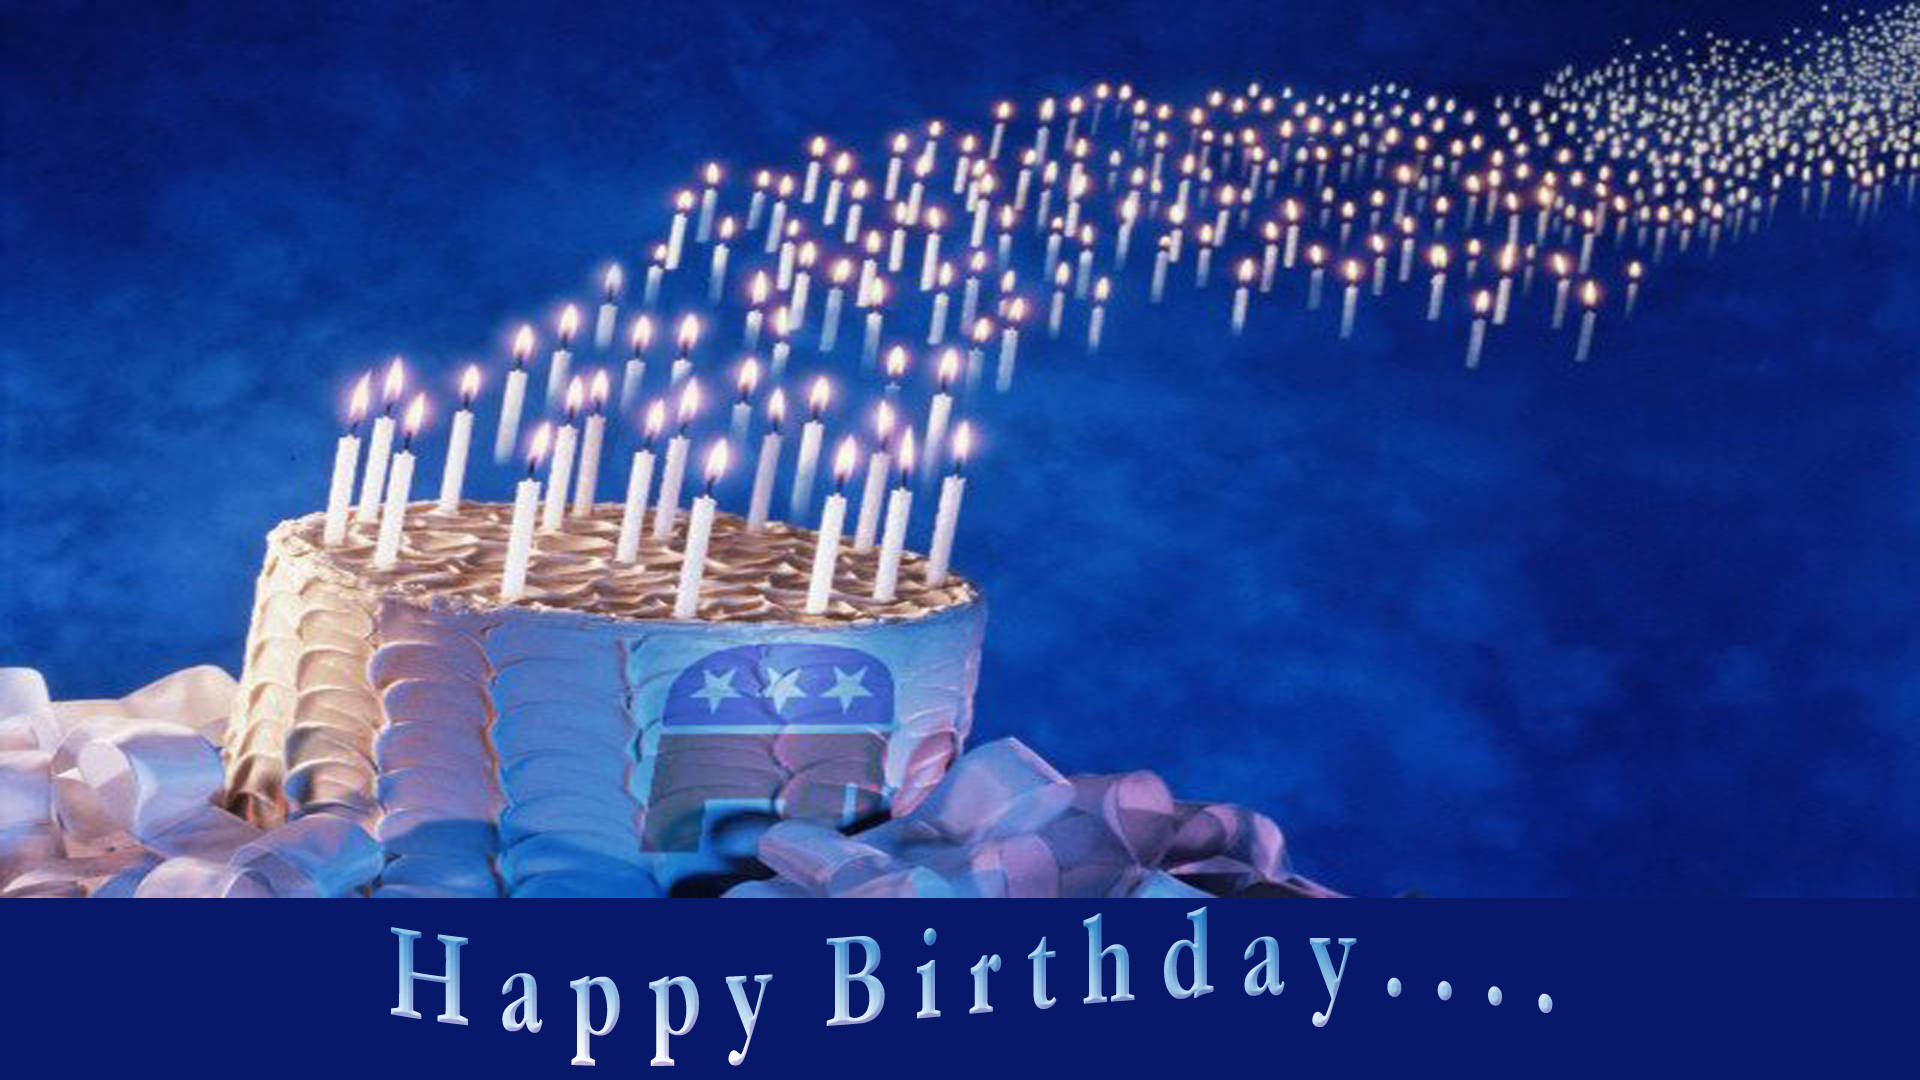 1920x1080 Download It's My Birthday Floating Candles Wallpaper